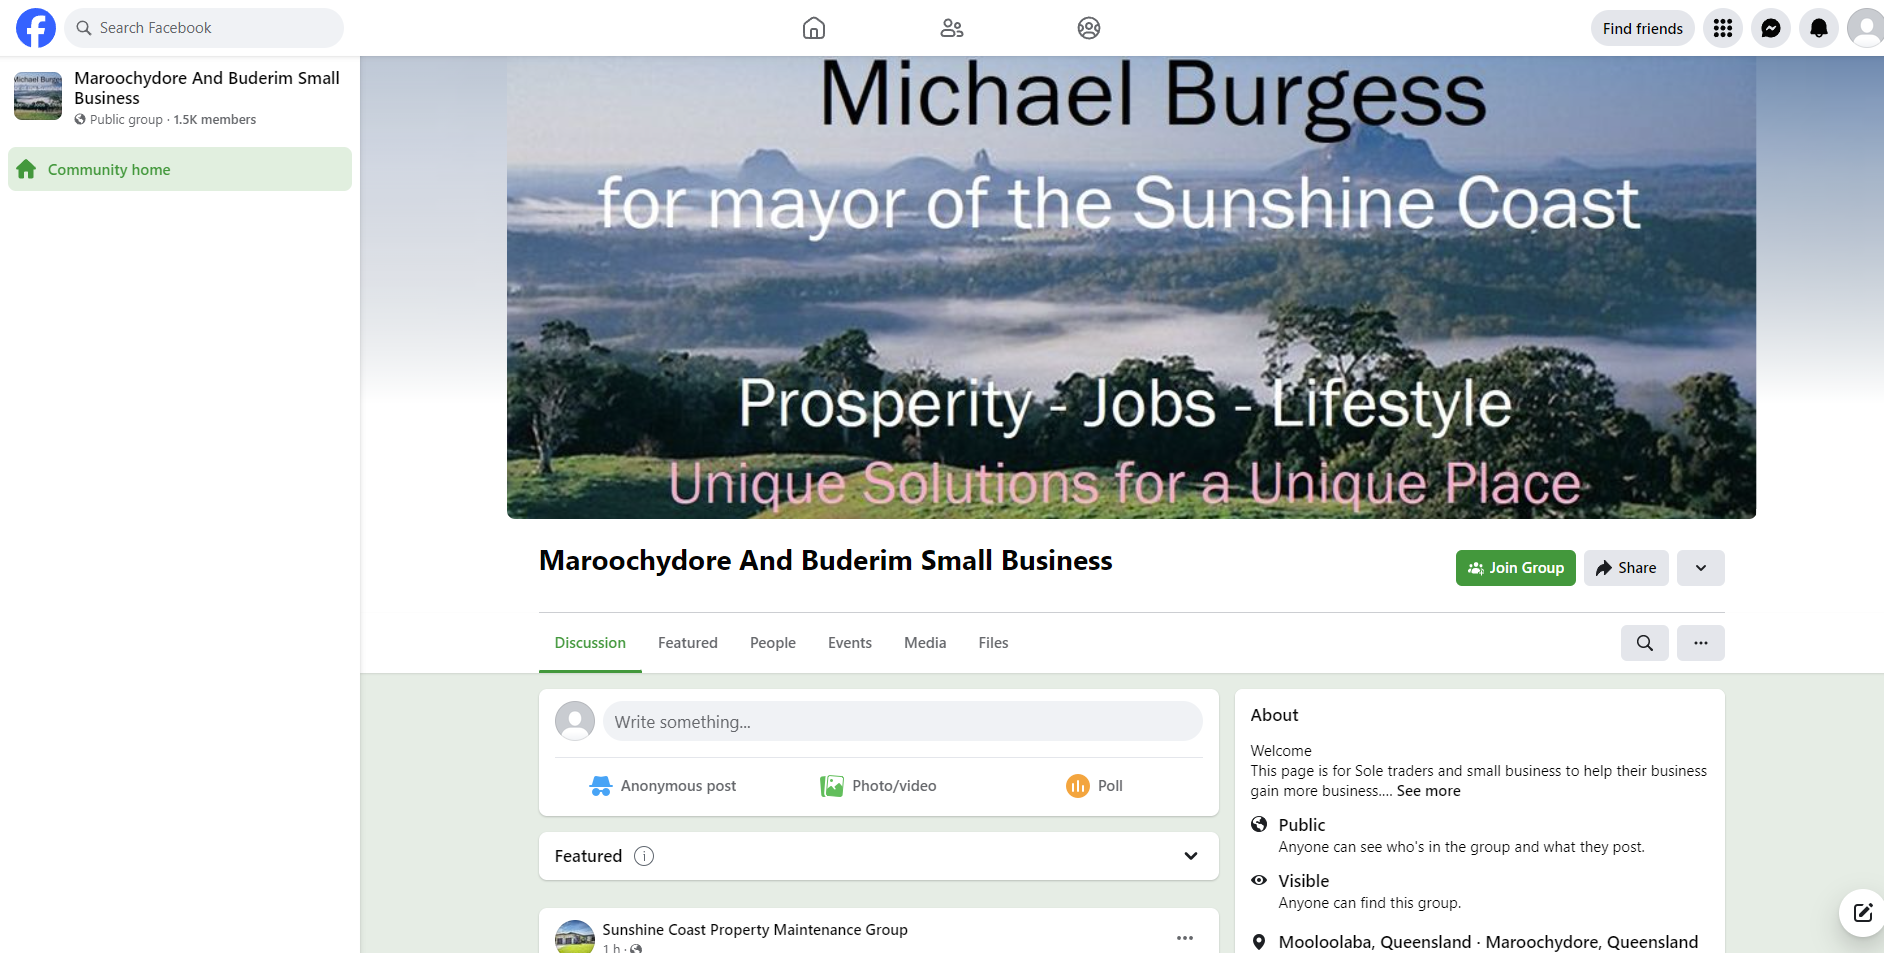 Maroochydore and Buderim Small Business